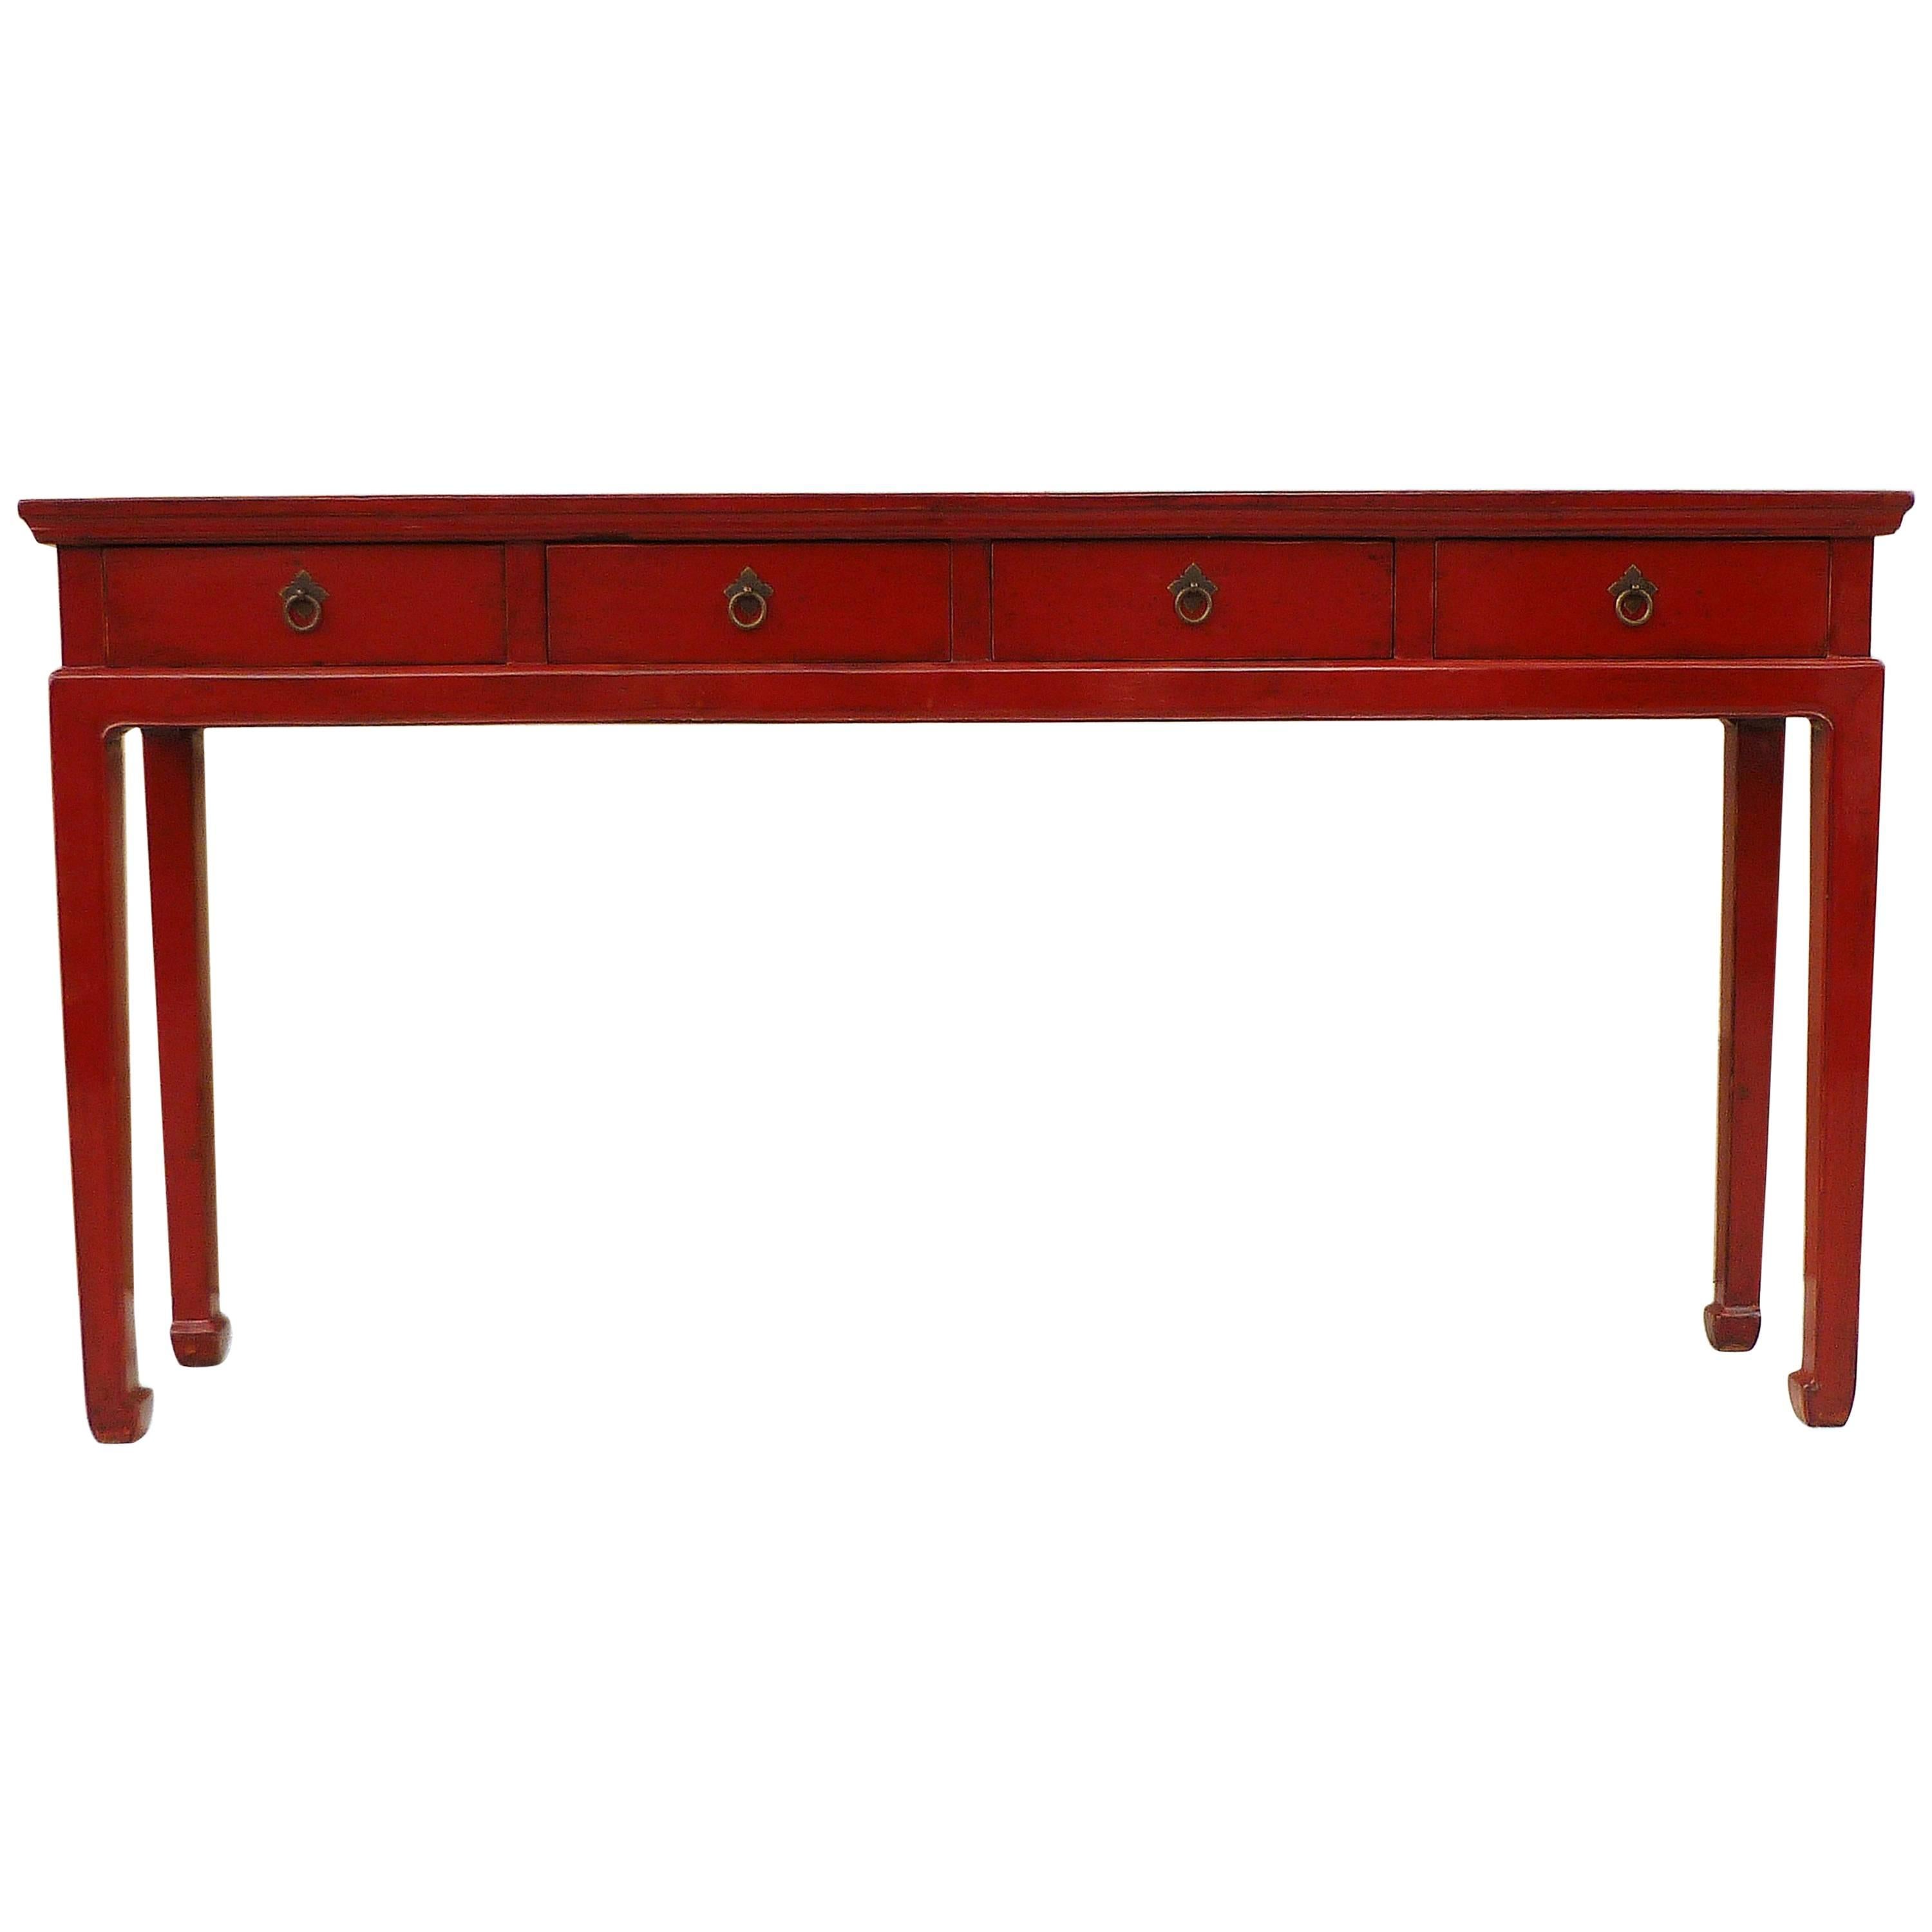 Red Lacquer Console Table with Drawers